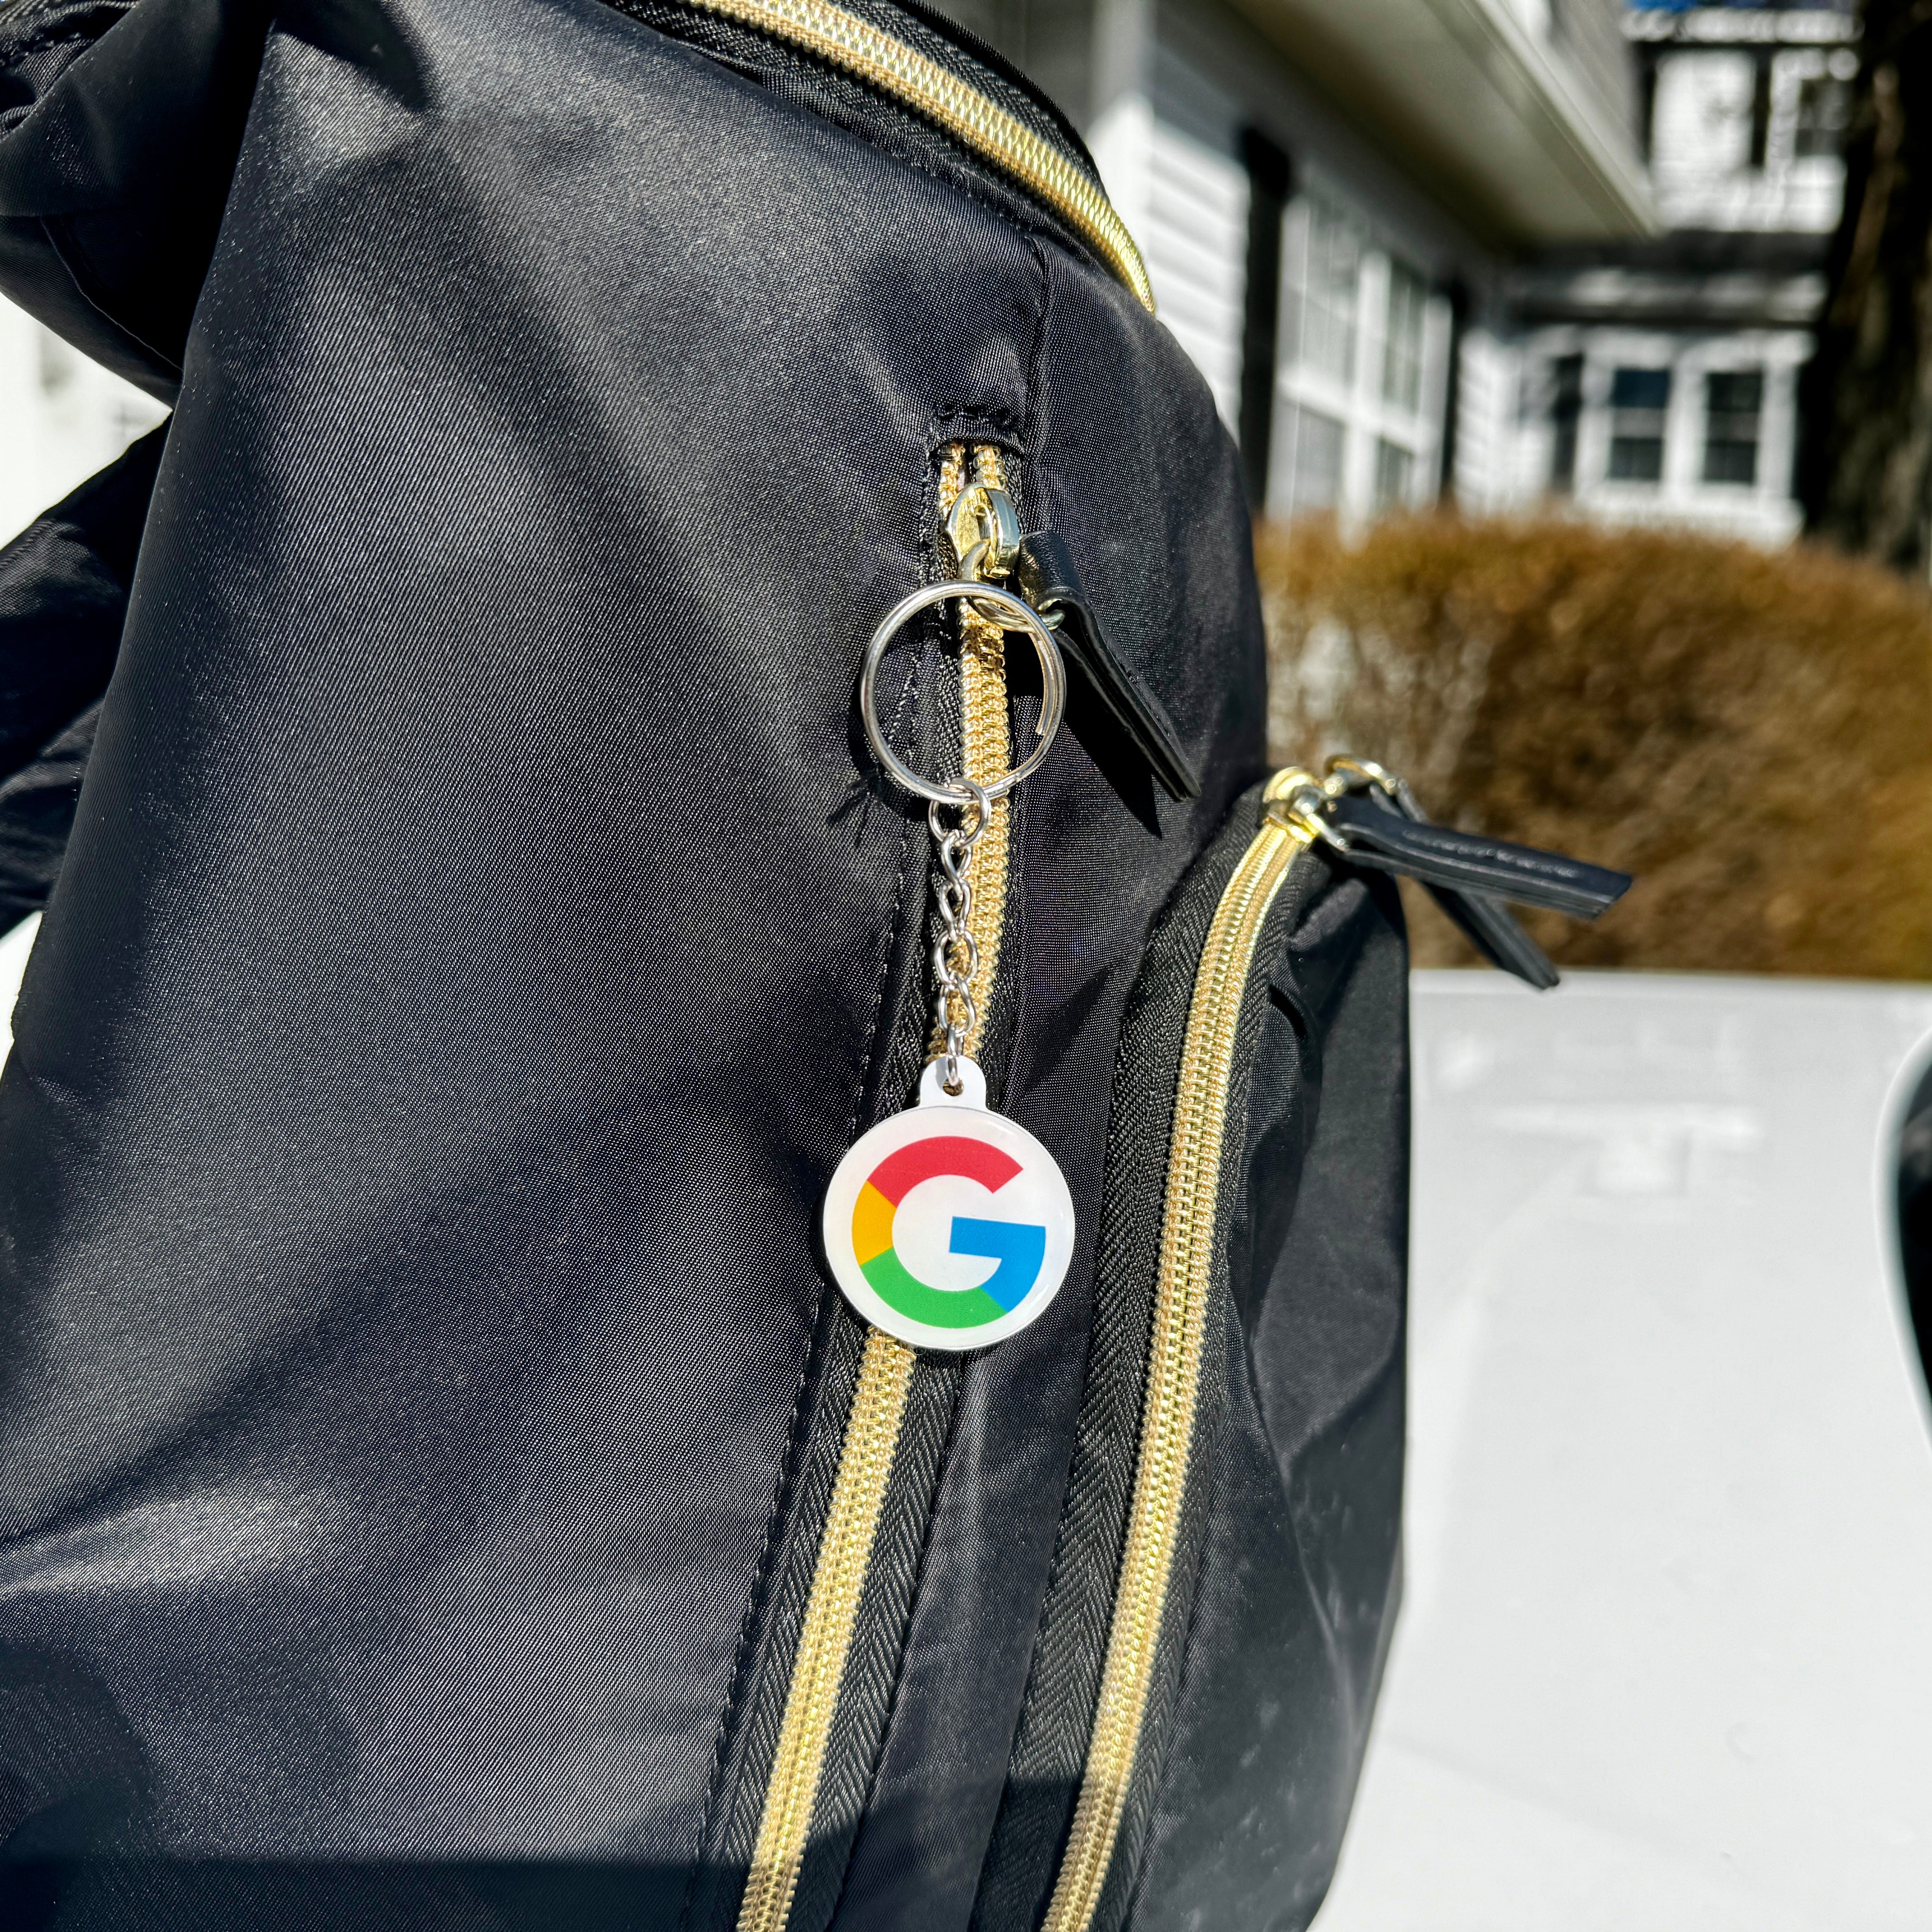 Google Review Keychain